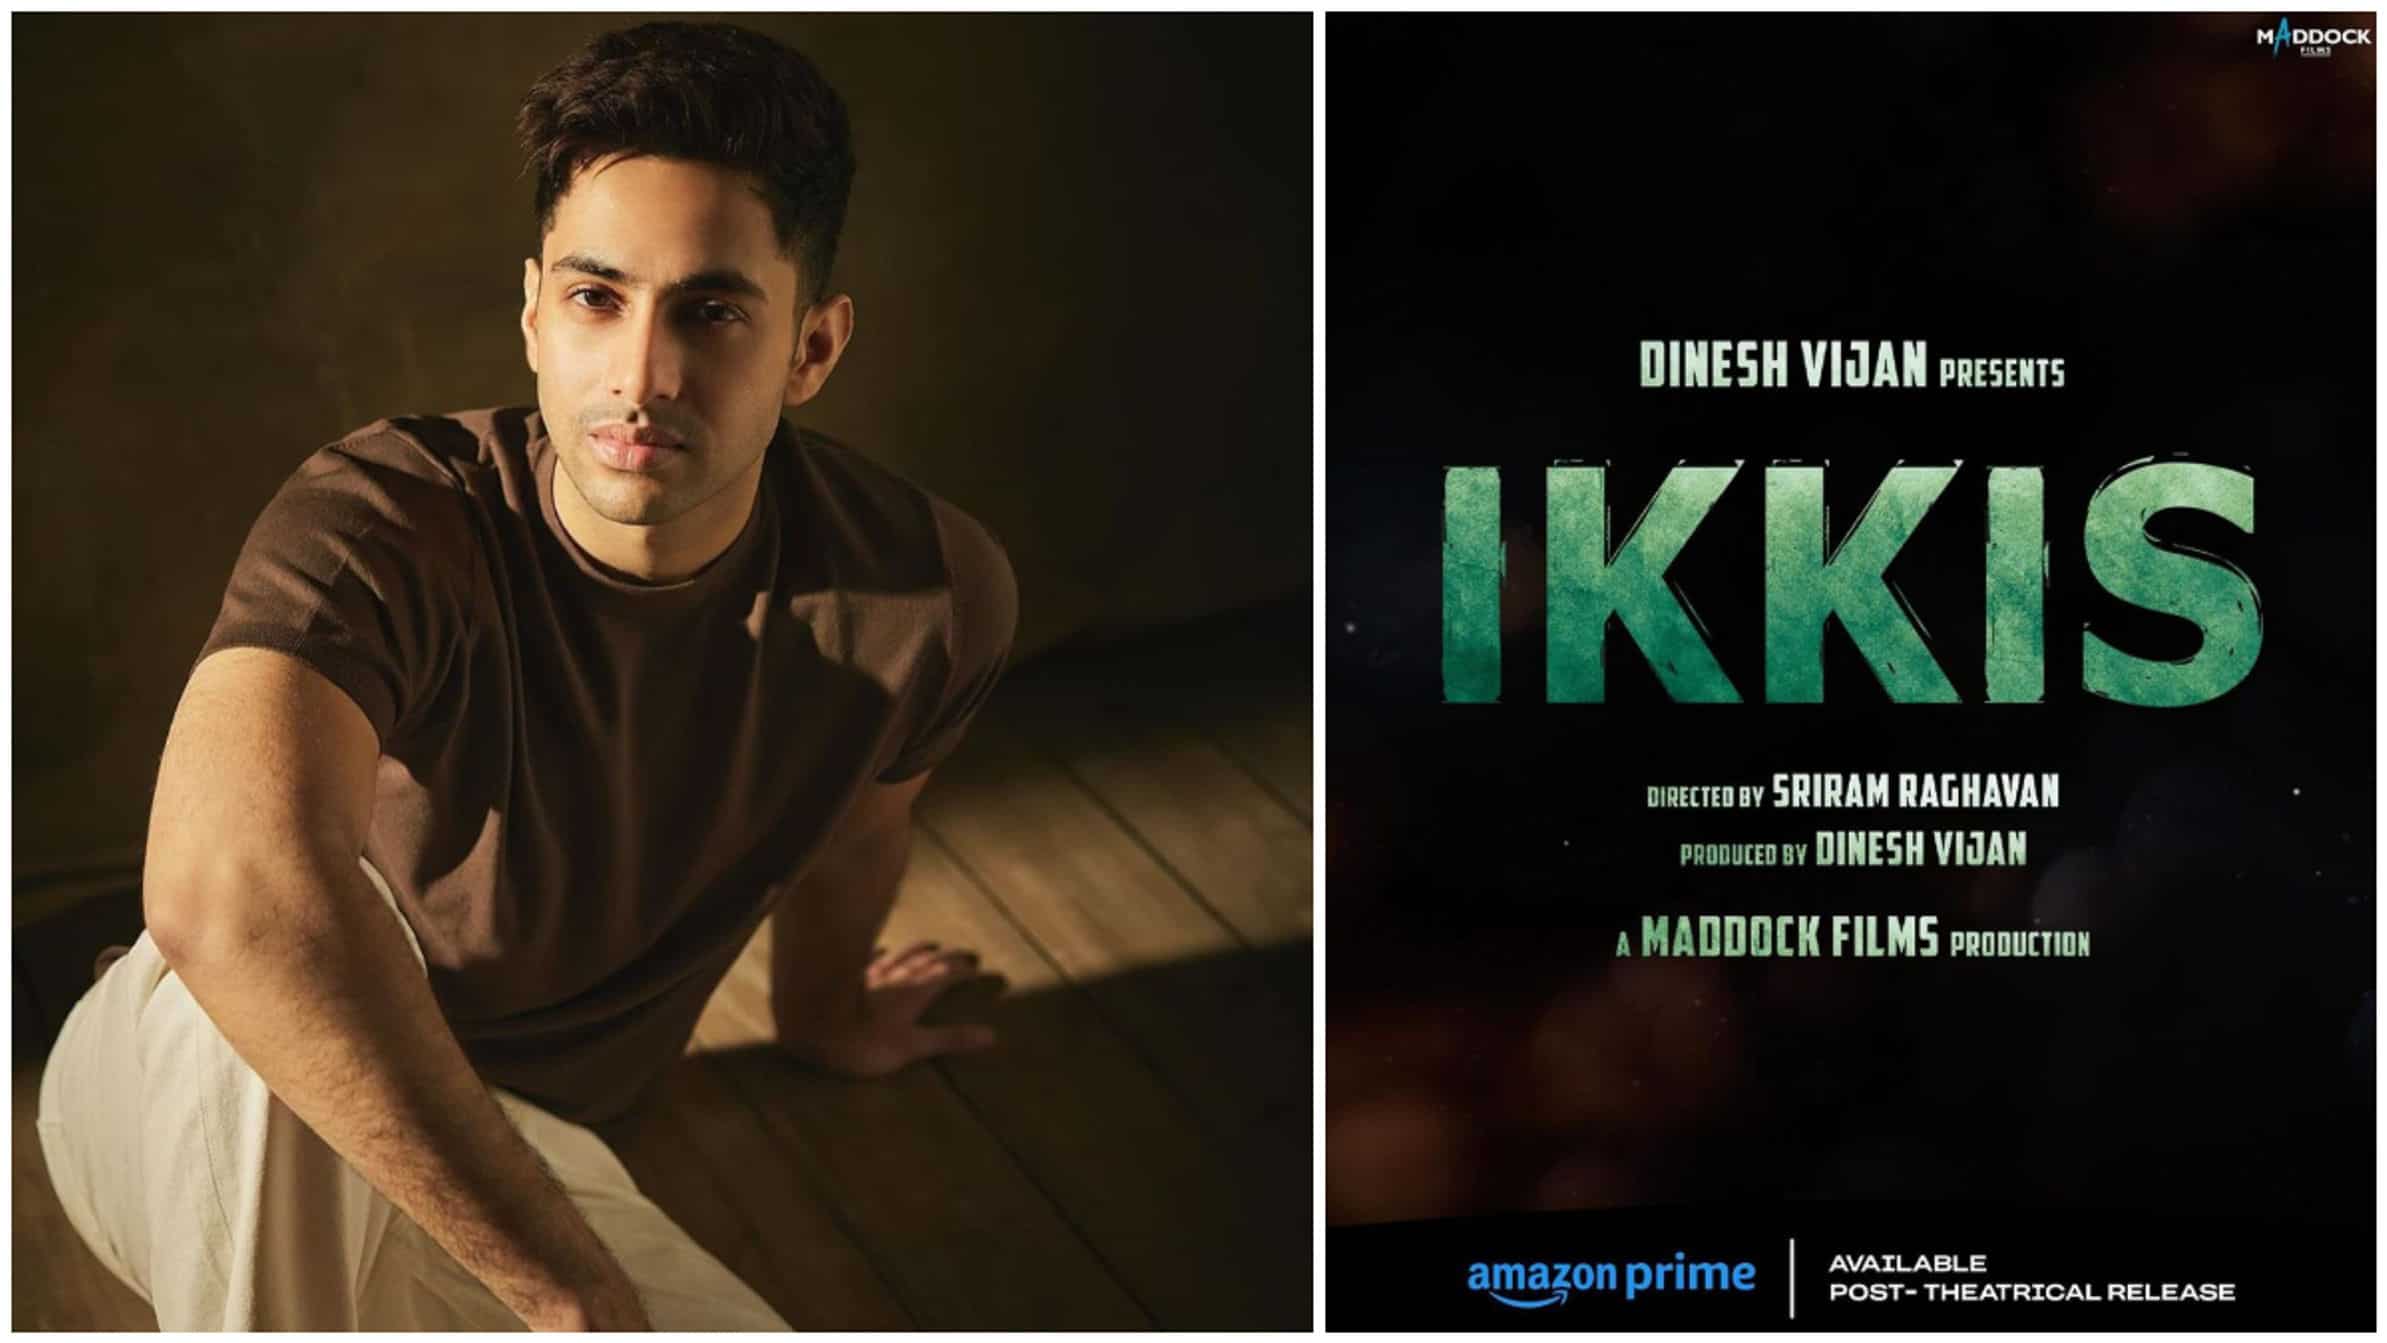 Sriram Raghavan on Agastya Nanda starrer Ikkis - ‘It is a story I really connected with and...’